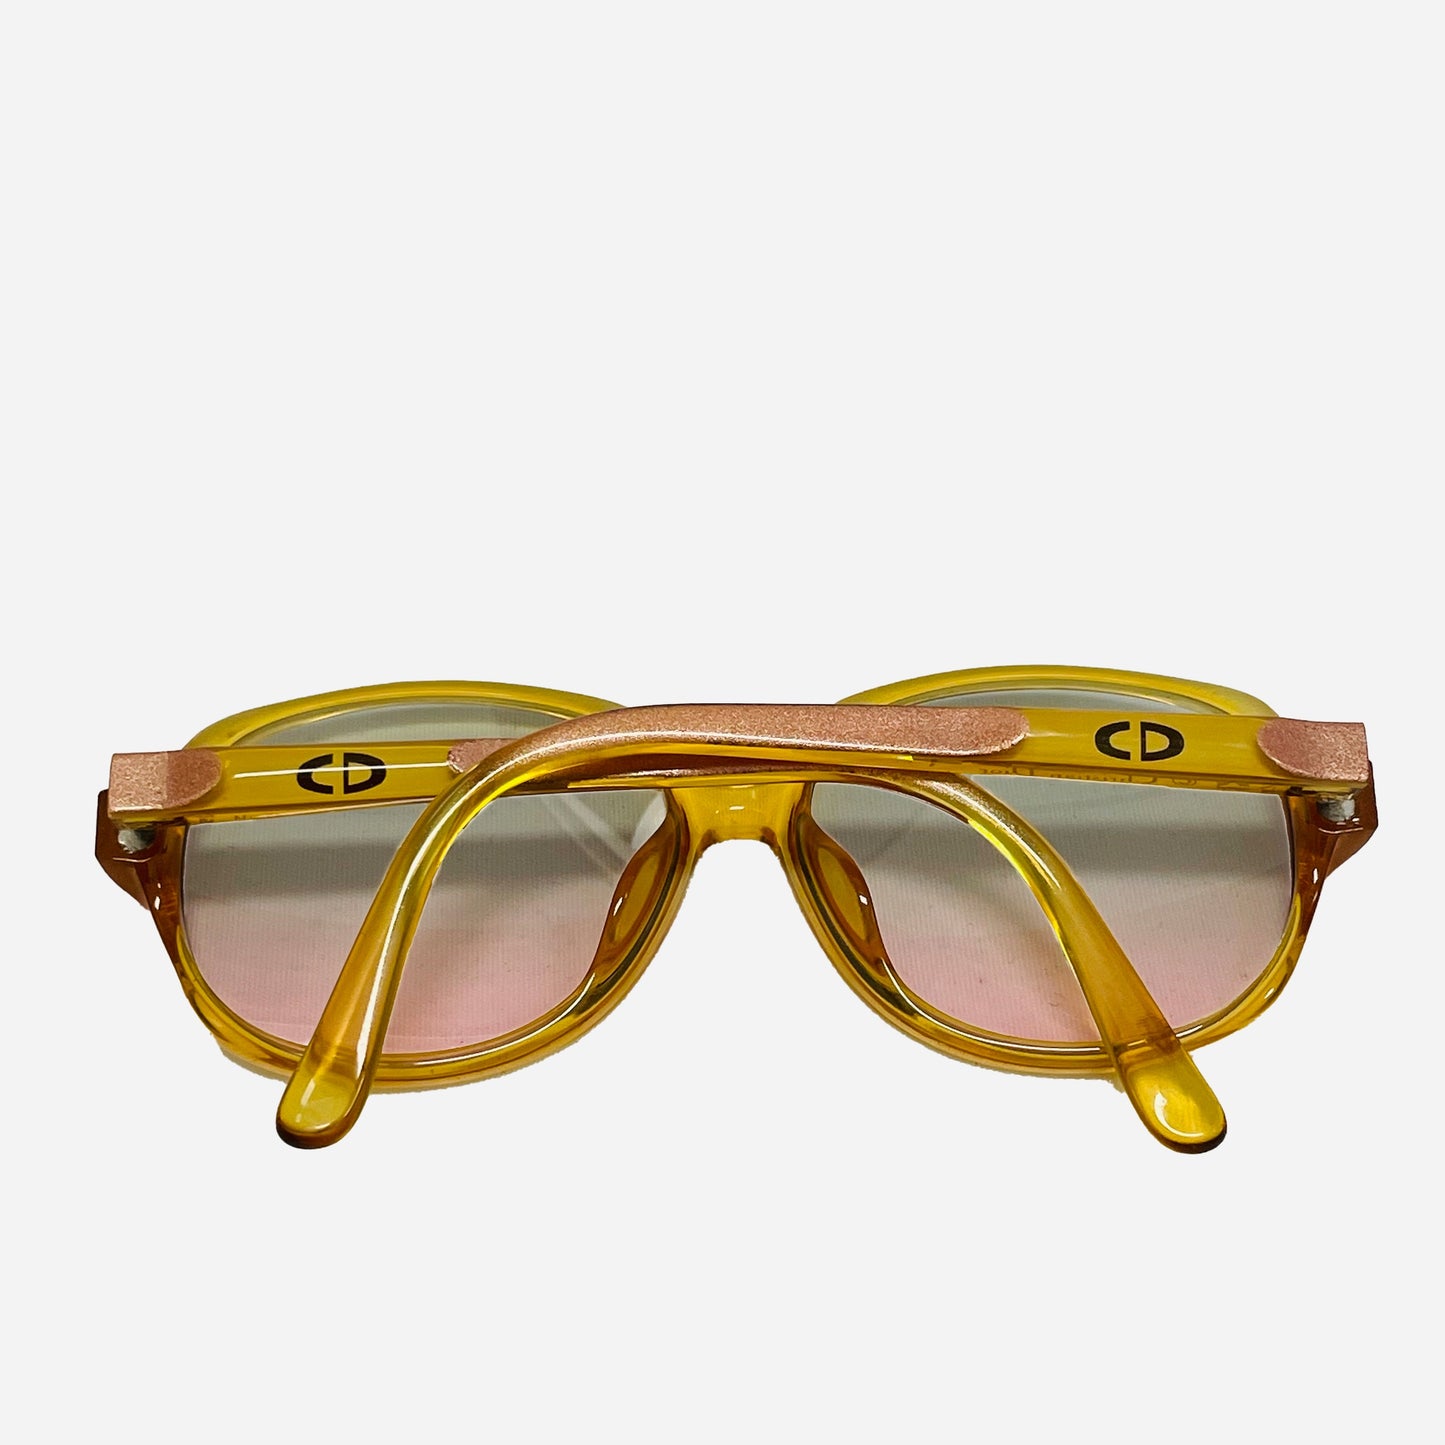    Vintage-Christian-Dior-Sonnenbrille-Sonnenbrille-2596-Optyl-the-seekers-back